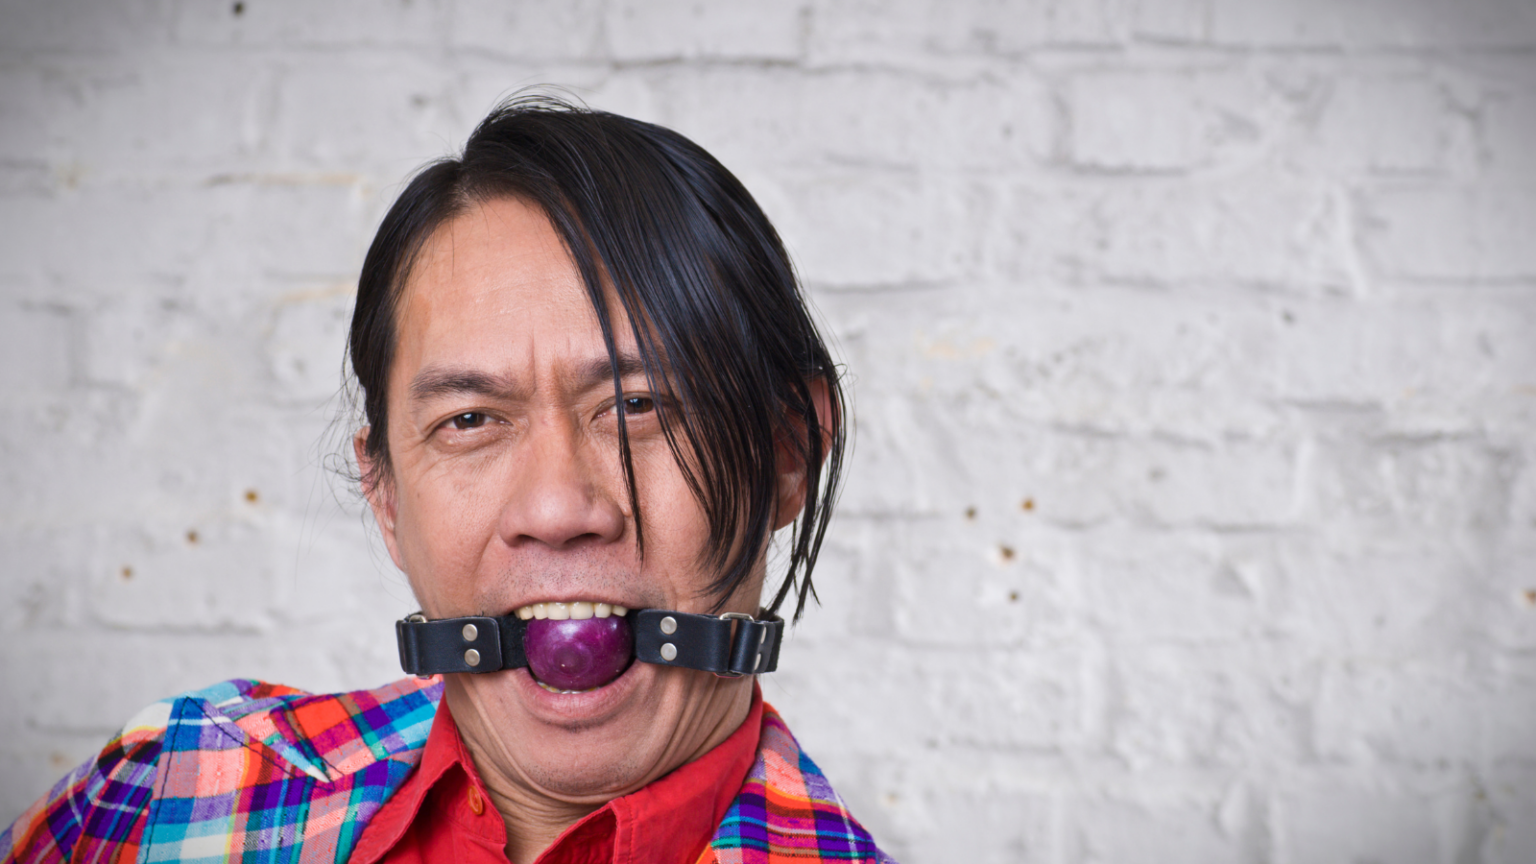 Asian man wearing plaid shirt with ball gag in mouth